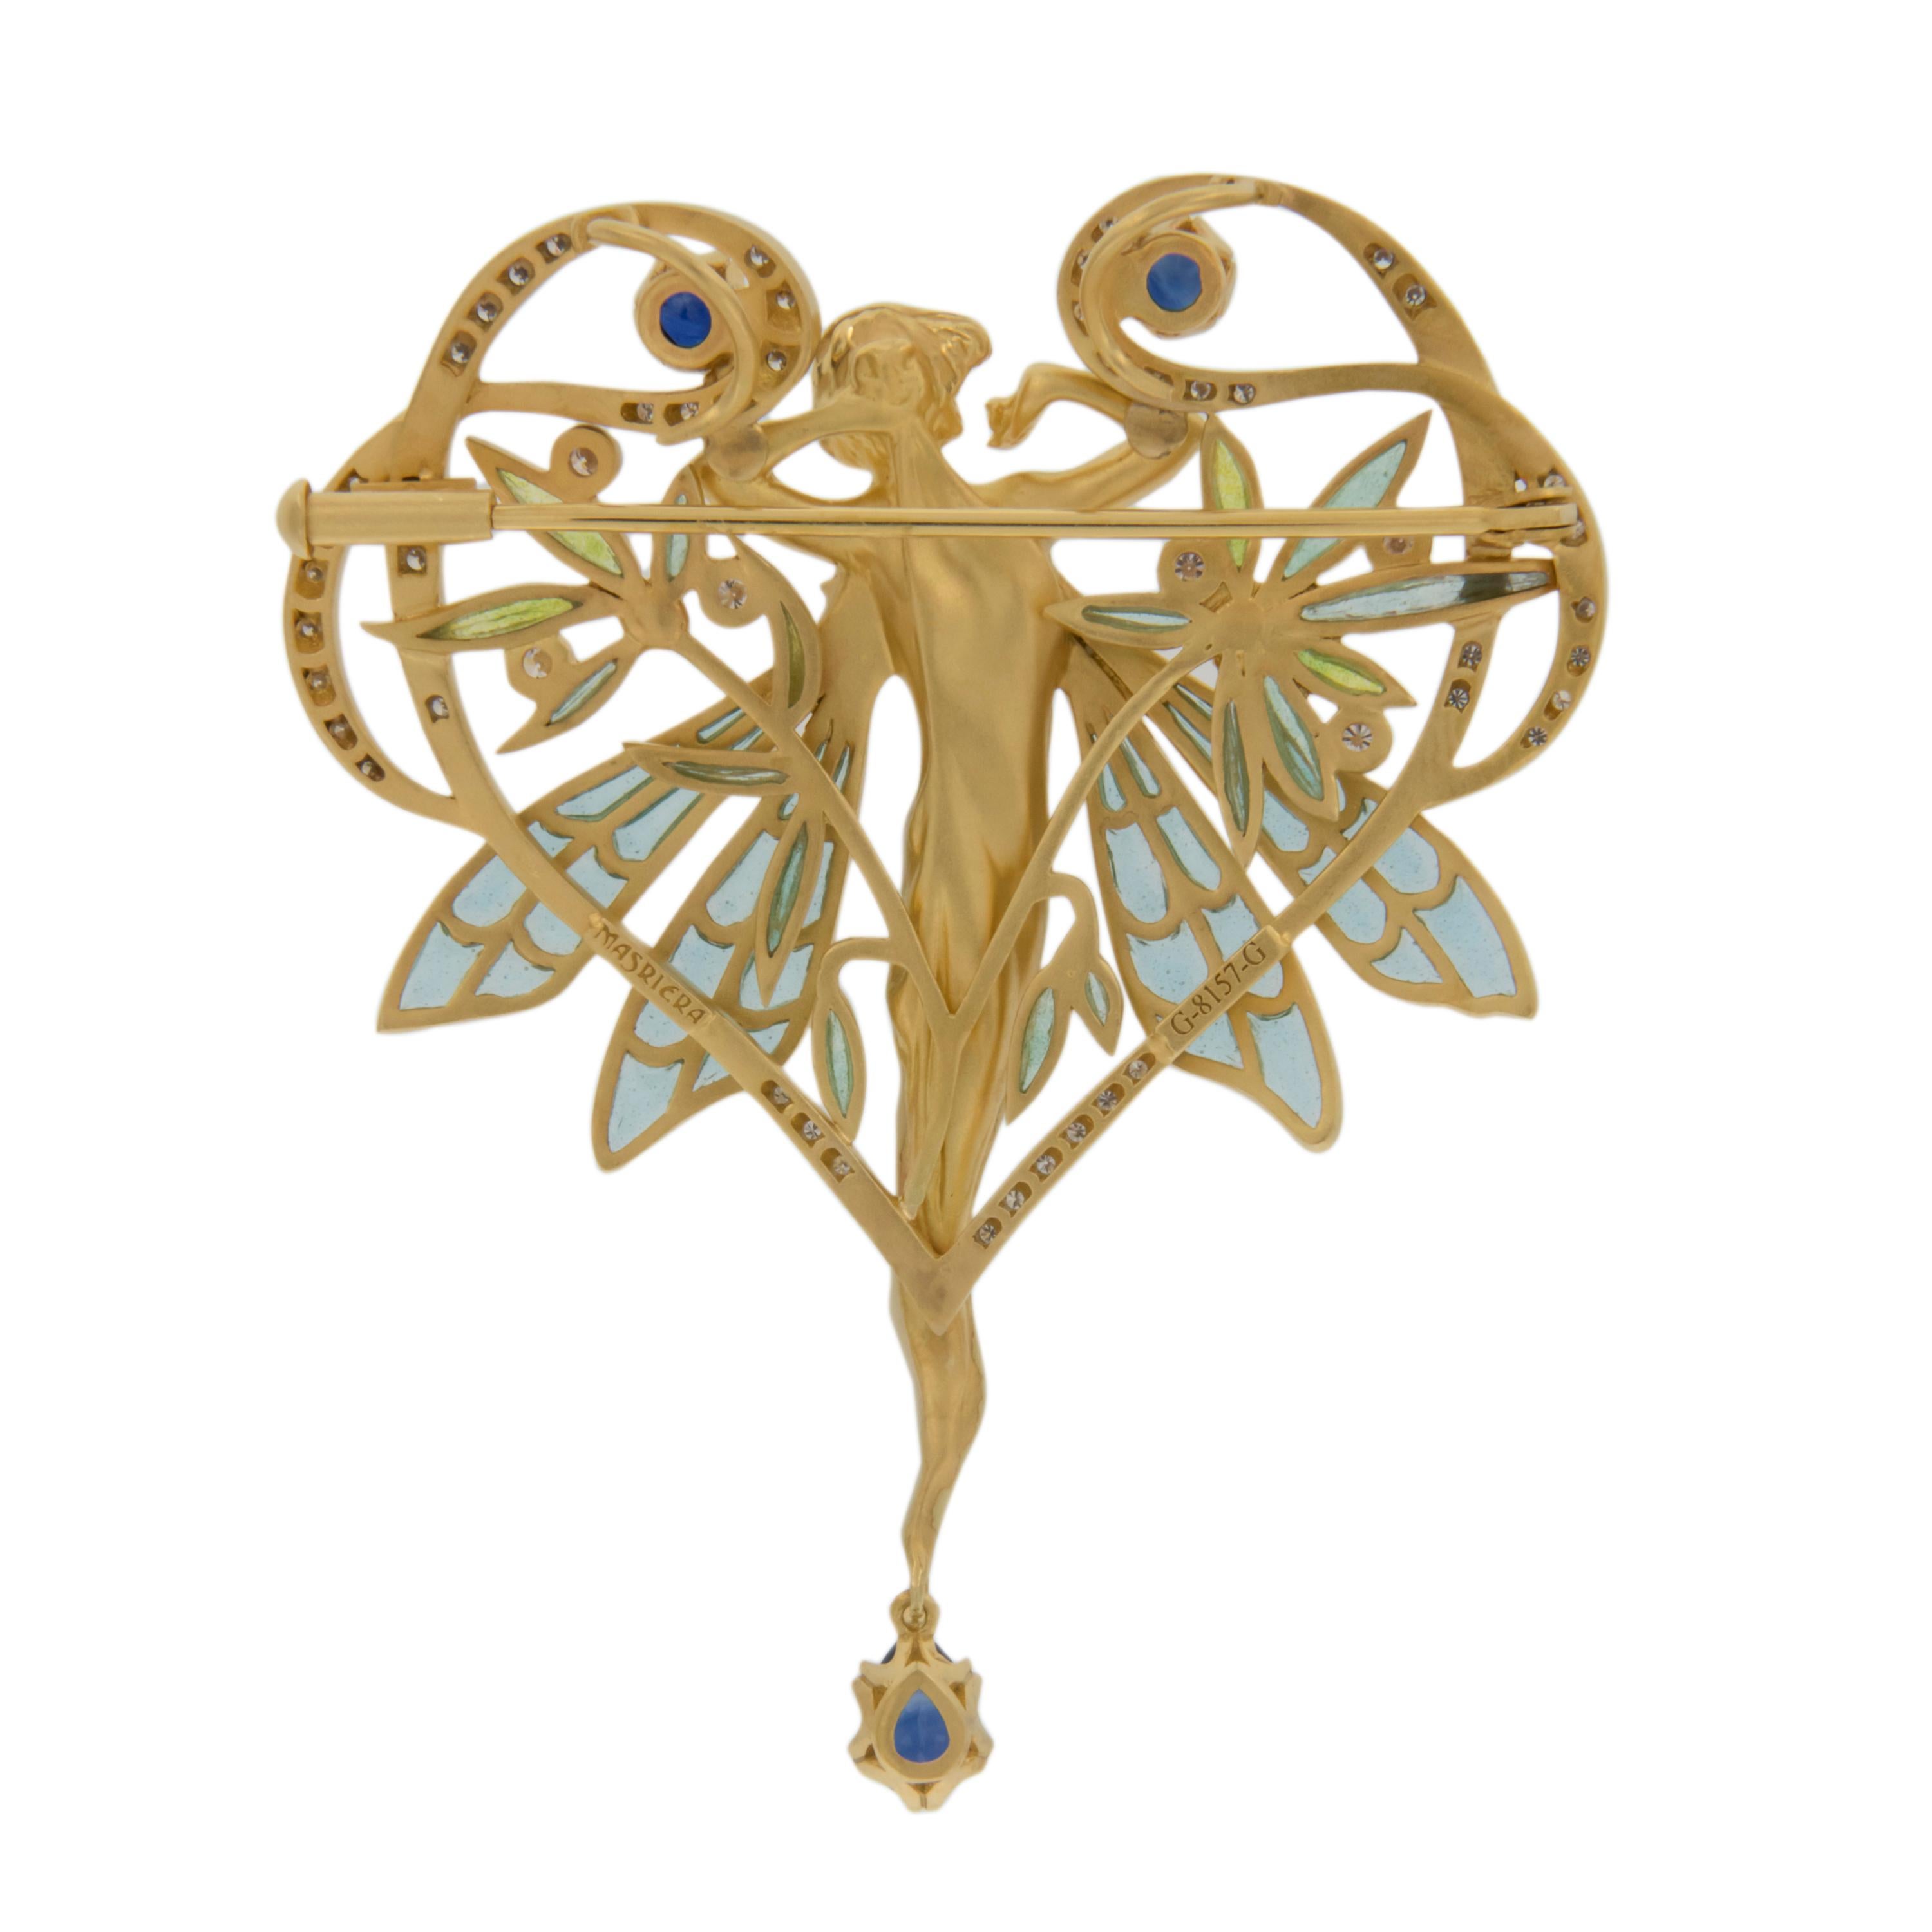 Masriera is a company world-renowned for their amazing enamel work & Art Nouveau jewelry. This 18kt yellow gold pendant brooch with “plique-à-jour” and “basse taille” fired enamel showcases a nymph with delicate wings set off by 0.93 Cttw blue